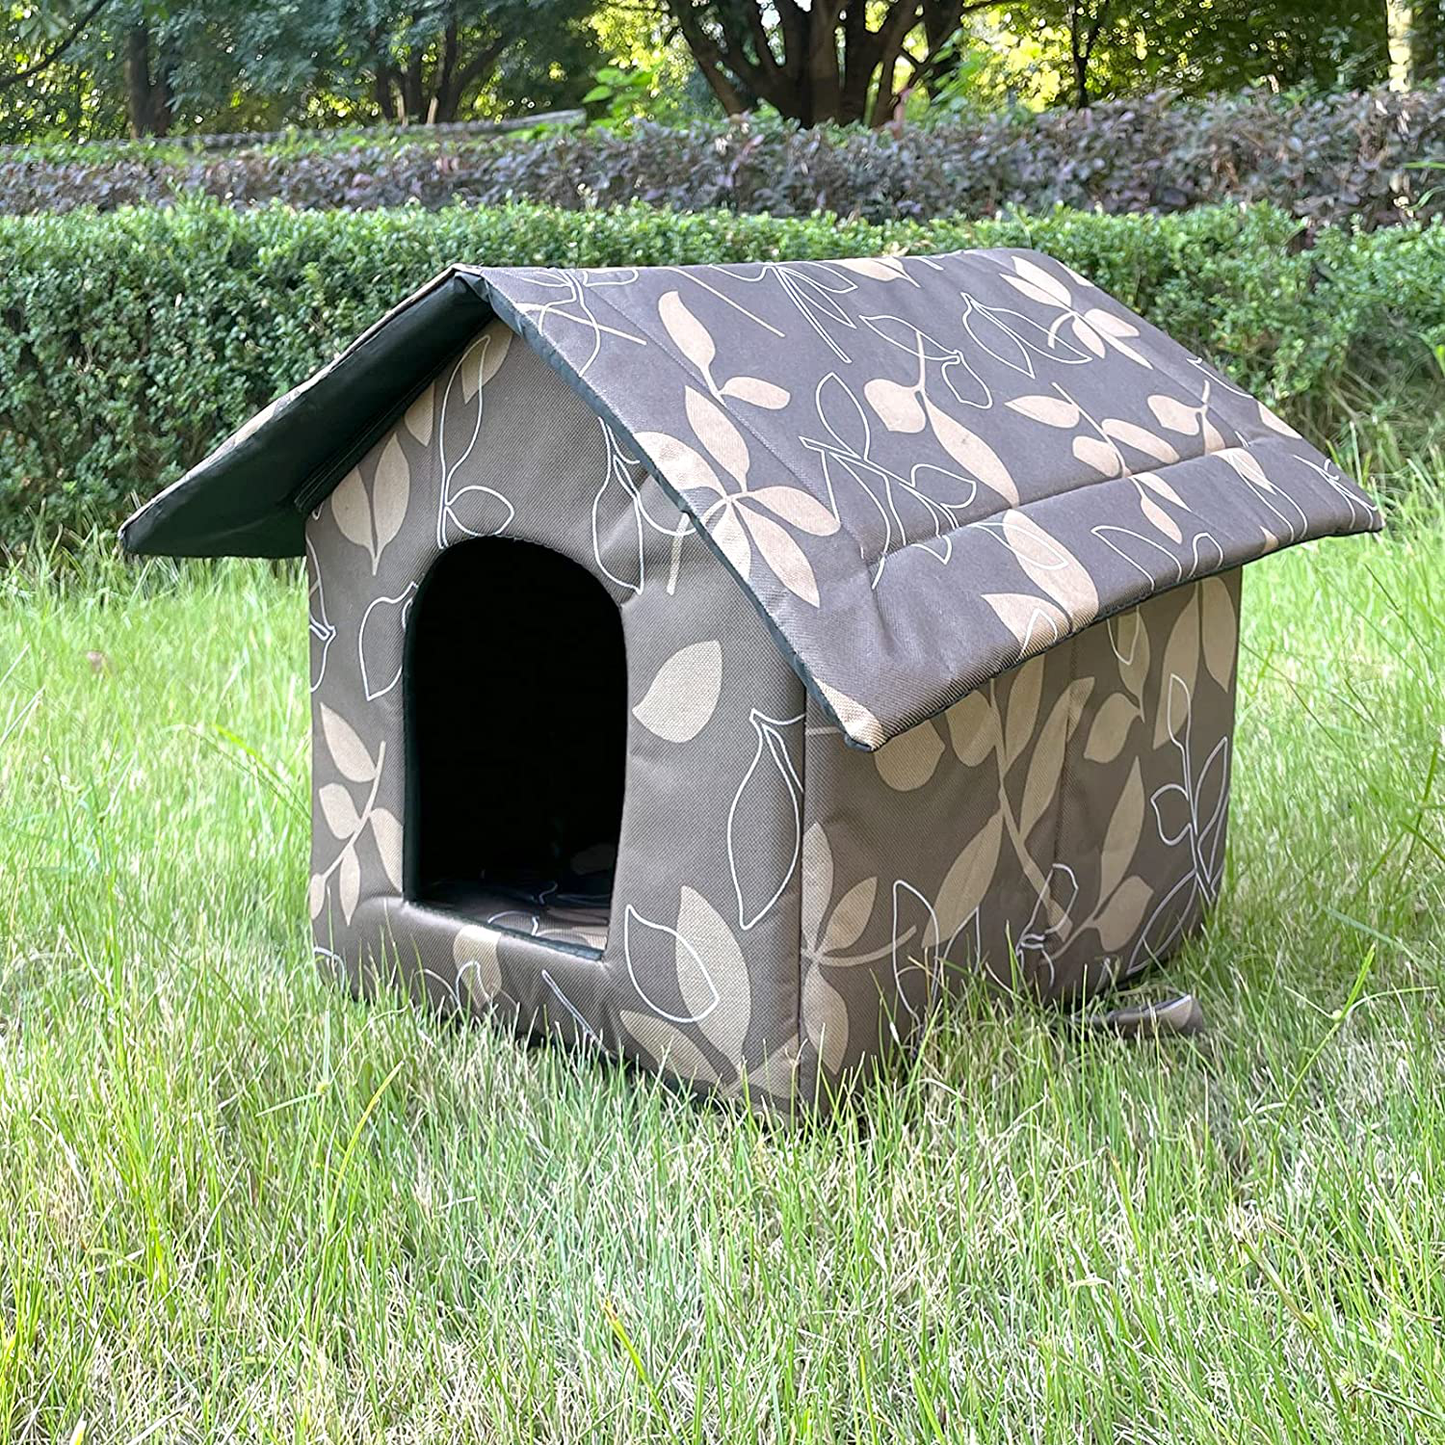 KUDES Cat House with Removable Cushion, Four Season Pet Nest Kitty Shelter with Waterproof Canvas Roof, Washable and Foldable Feral Cat Kennel Cave House Small Dog Tent Cabin for Indoor Outdoor Animals & Pet Supplies > Pet Supplies > Dog Supplies > Dog Houses KUDES   